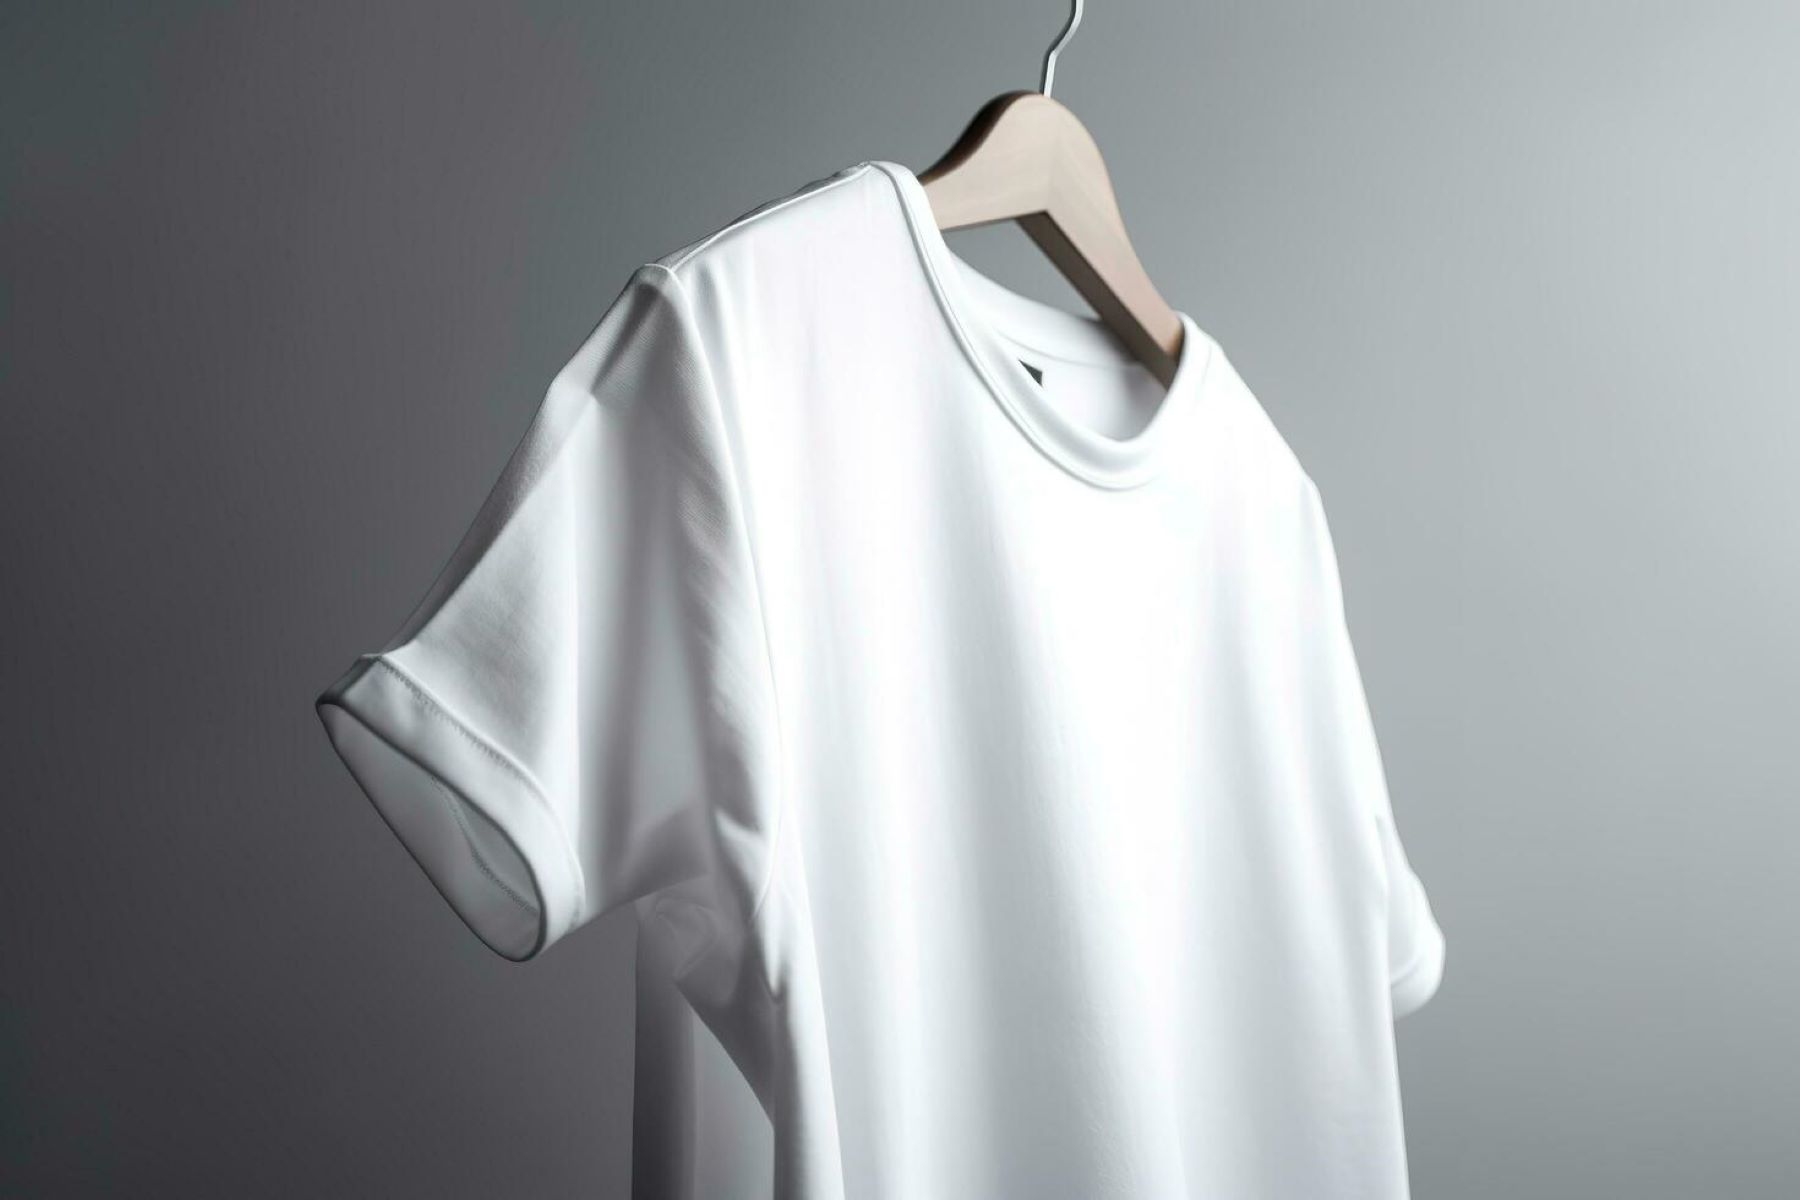 The Surprising Reason Wealthy Individuals Splurge On $400 Plain White T-Shirts – You Won’t Believe It!